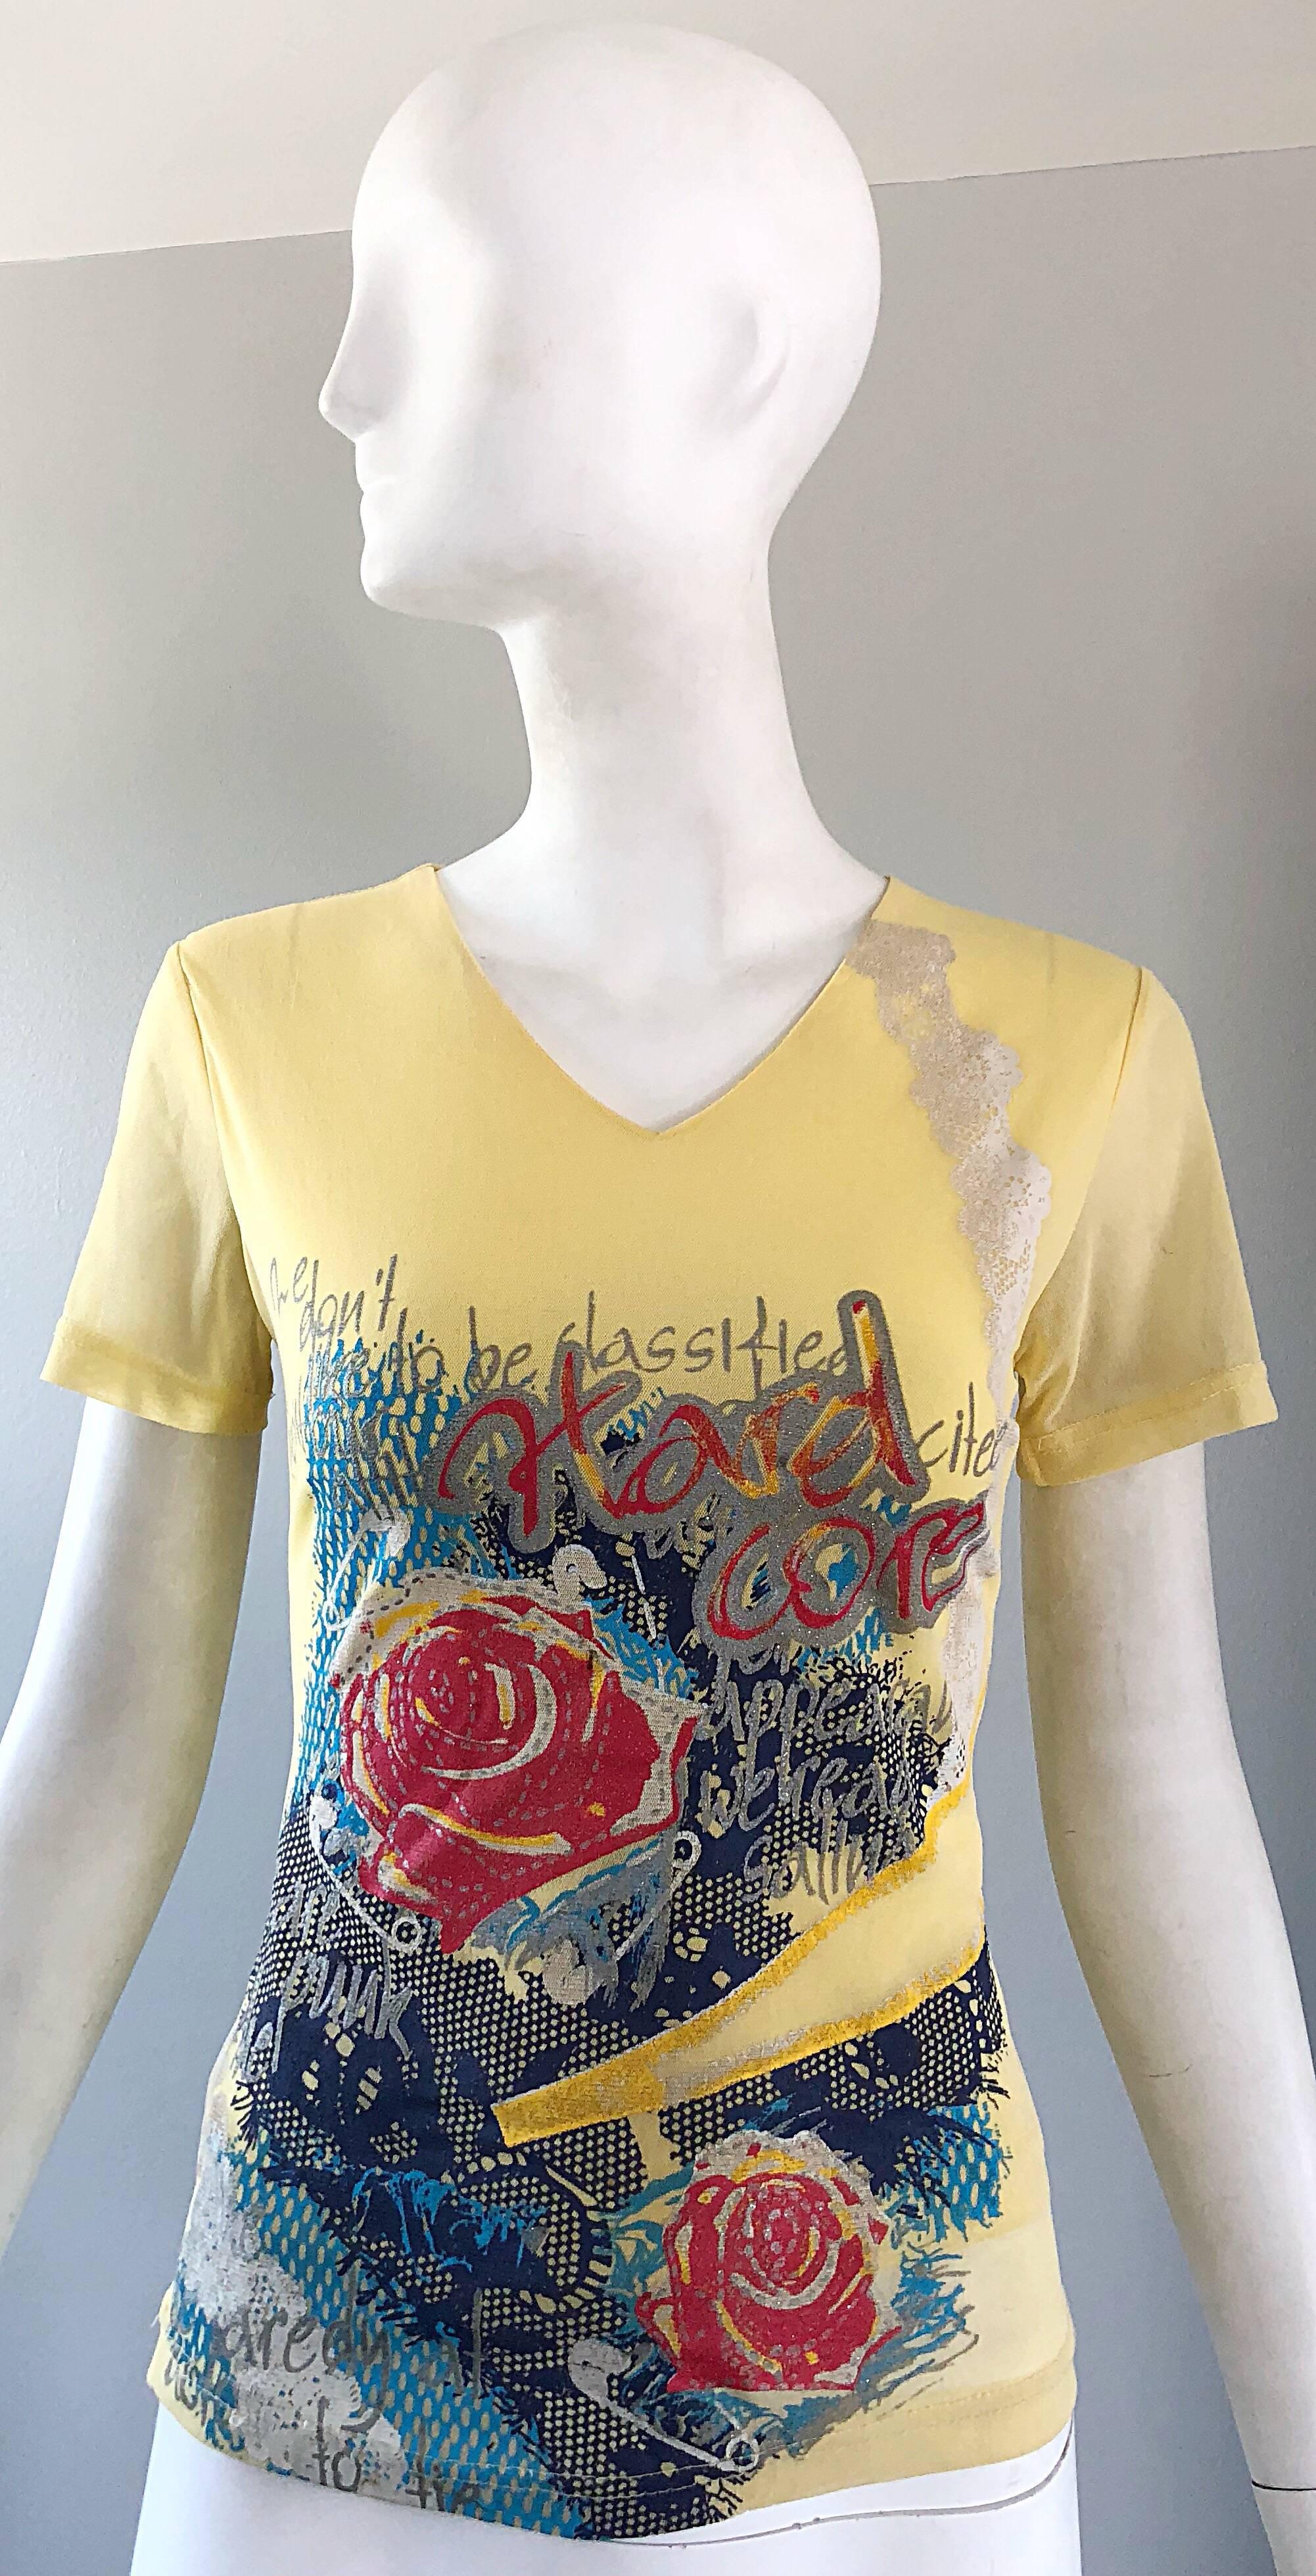 Awesome 90s MAX NUGUS HAUTE COUTURE pale yellow double layered mesh short sleeve v-neck shirt! Features graffiti prints in red, teal and navy blue. Has a Jean Paul Gaultier vibe to it! 
In great unworn condition.
Made in USA
Approximately SIze Small